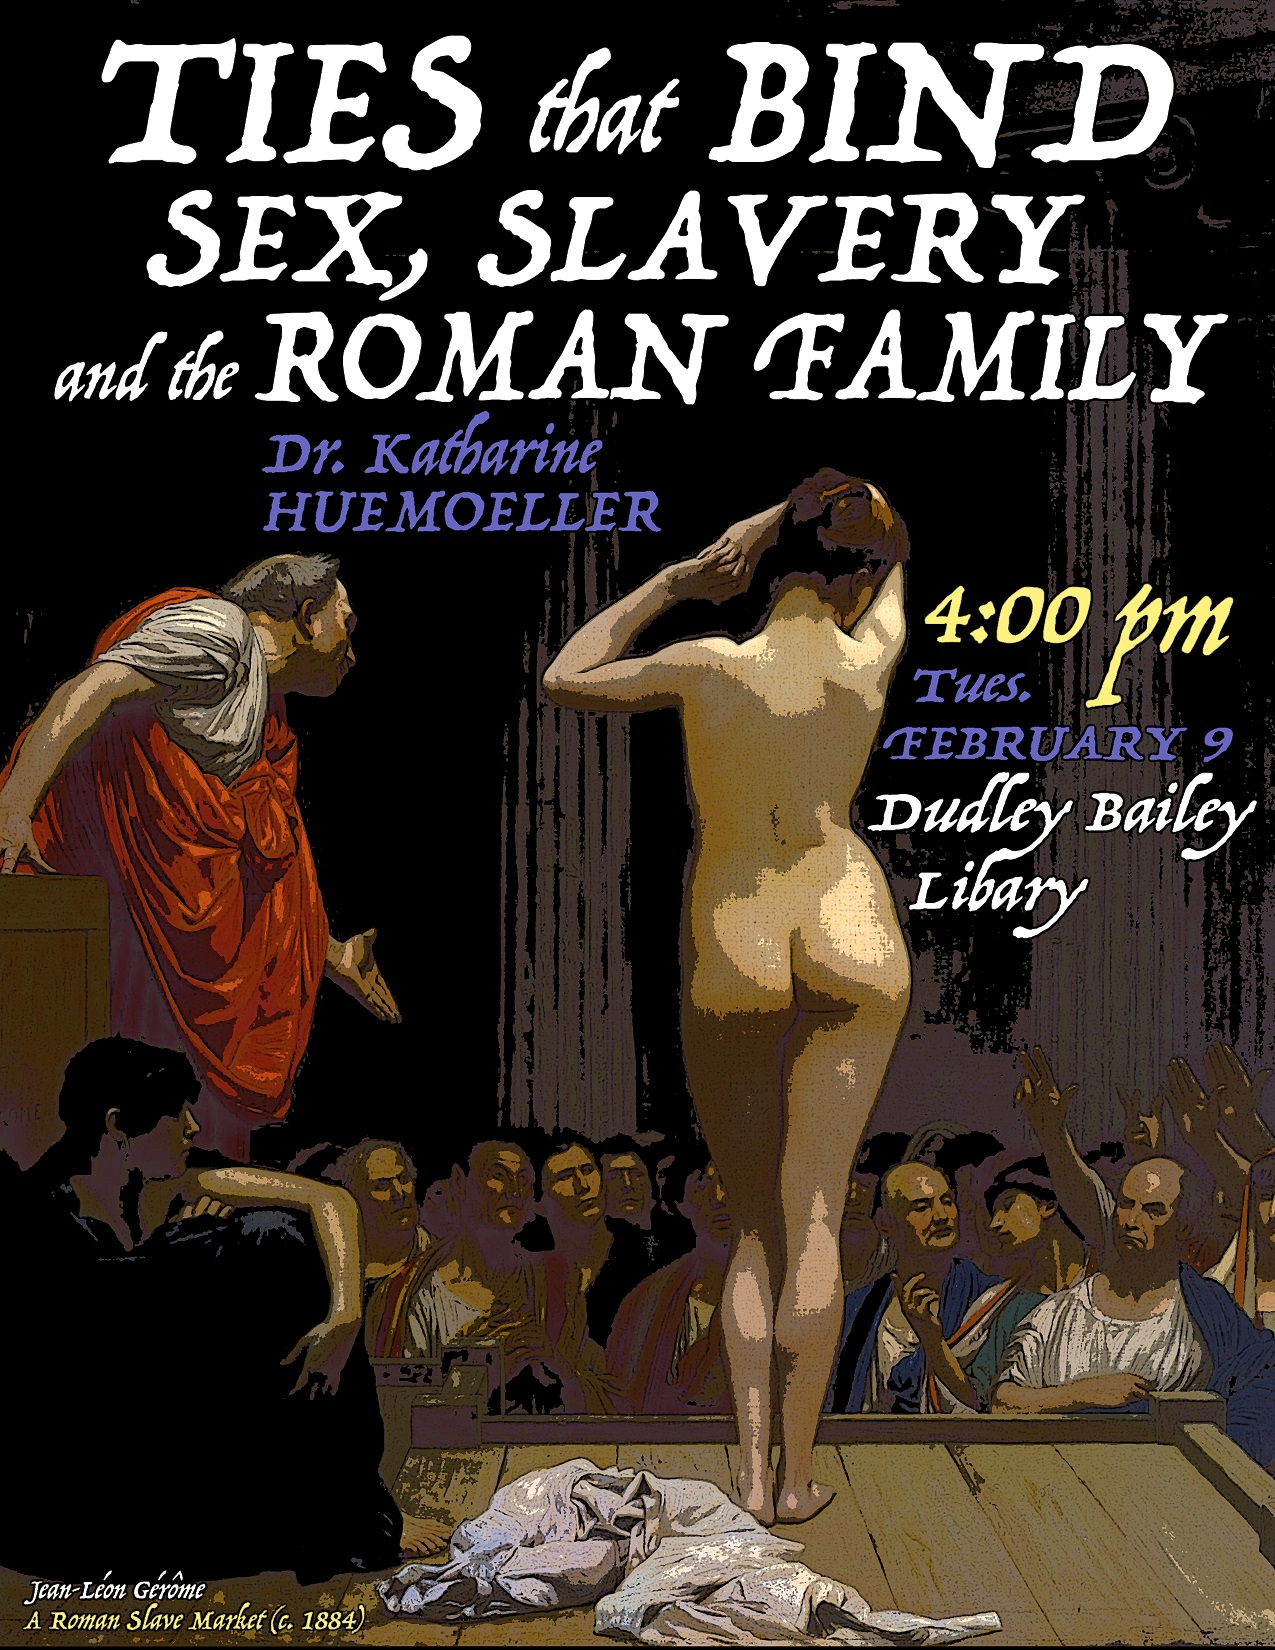 Ties that Bind: Sex, Slavery, and the Roman Family